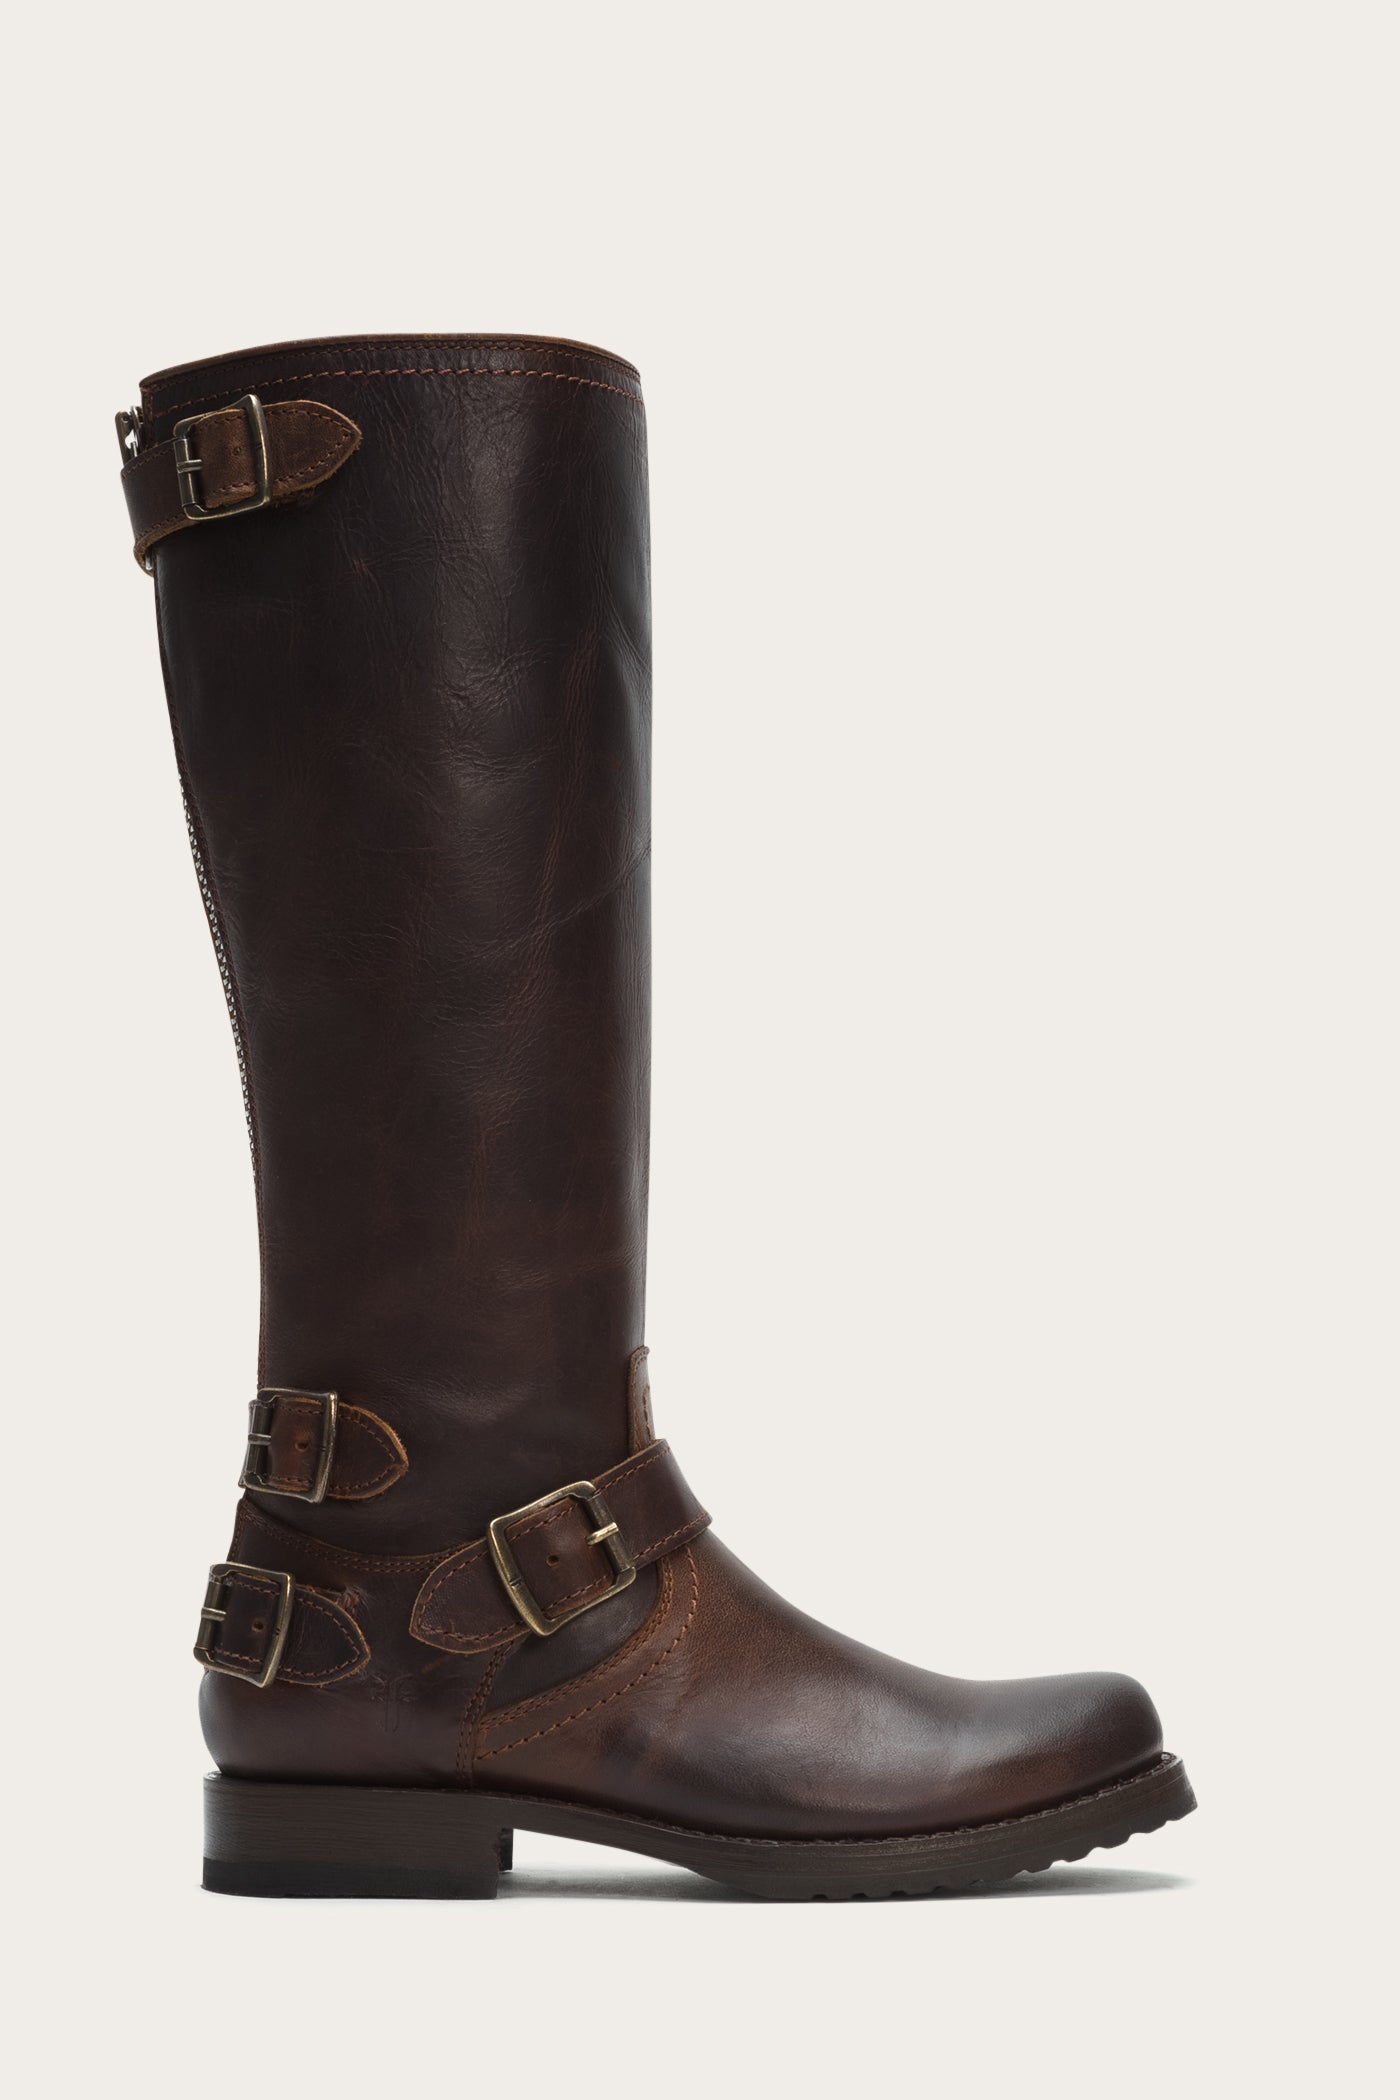 frye boots with zipper in back